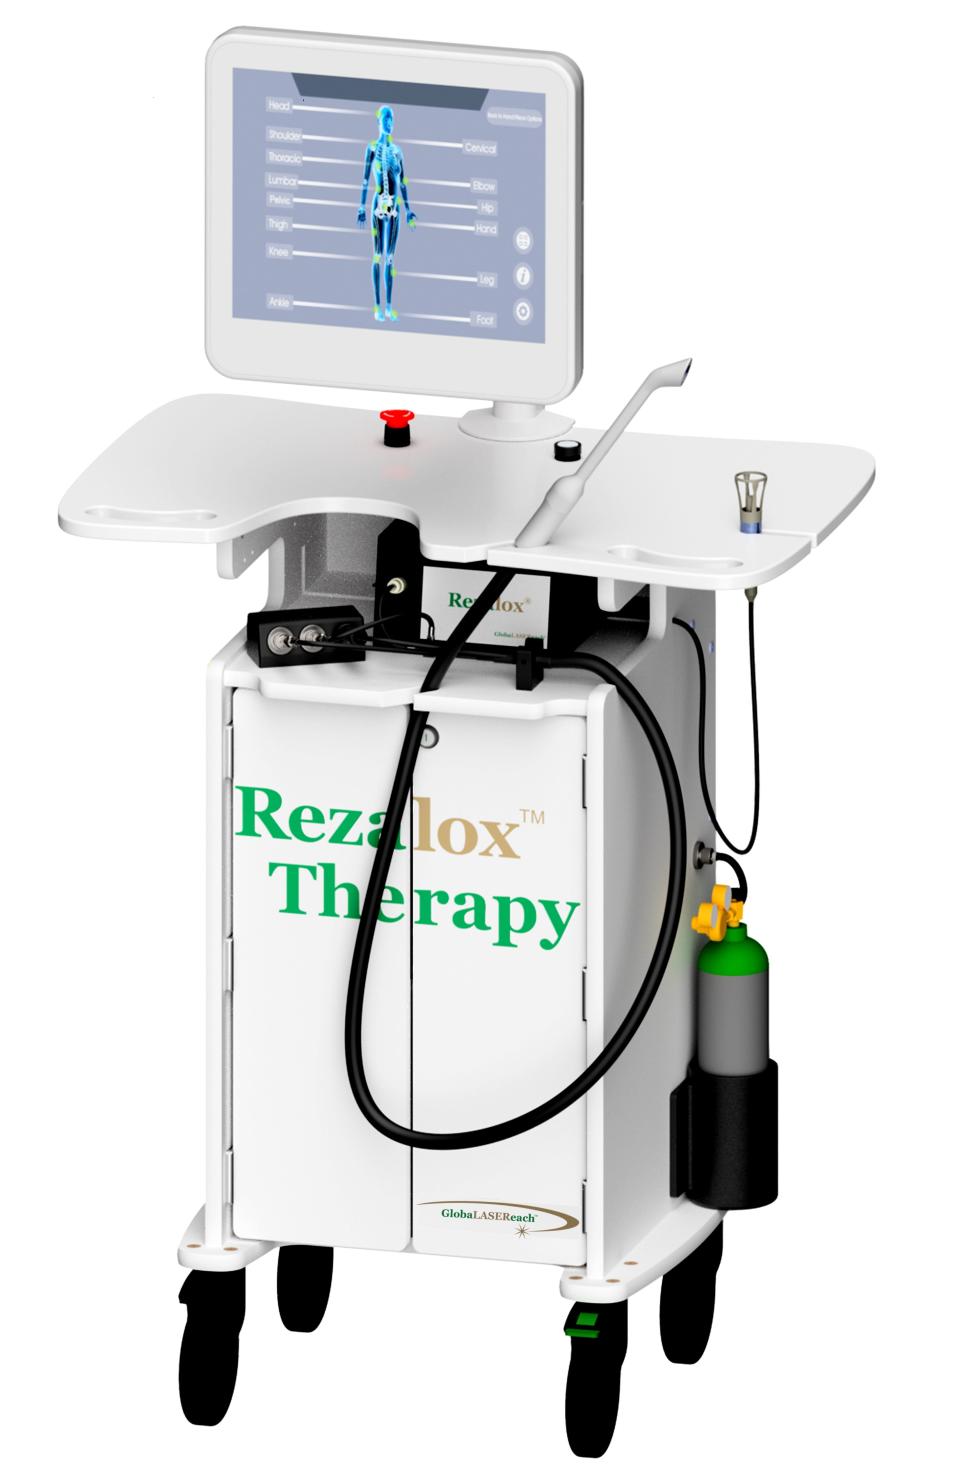 A rendering of the Rezalox Therapy System in development by Dr. Nolan Hetz of Manitowoc and a team of specialists.